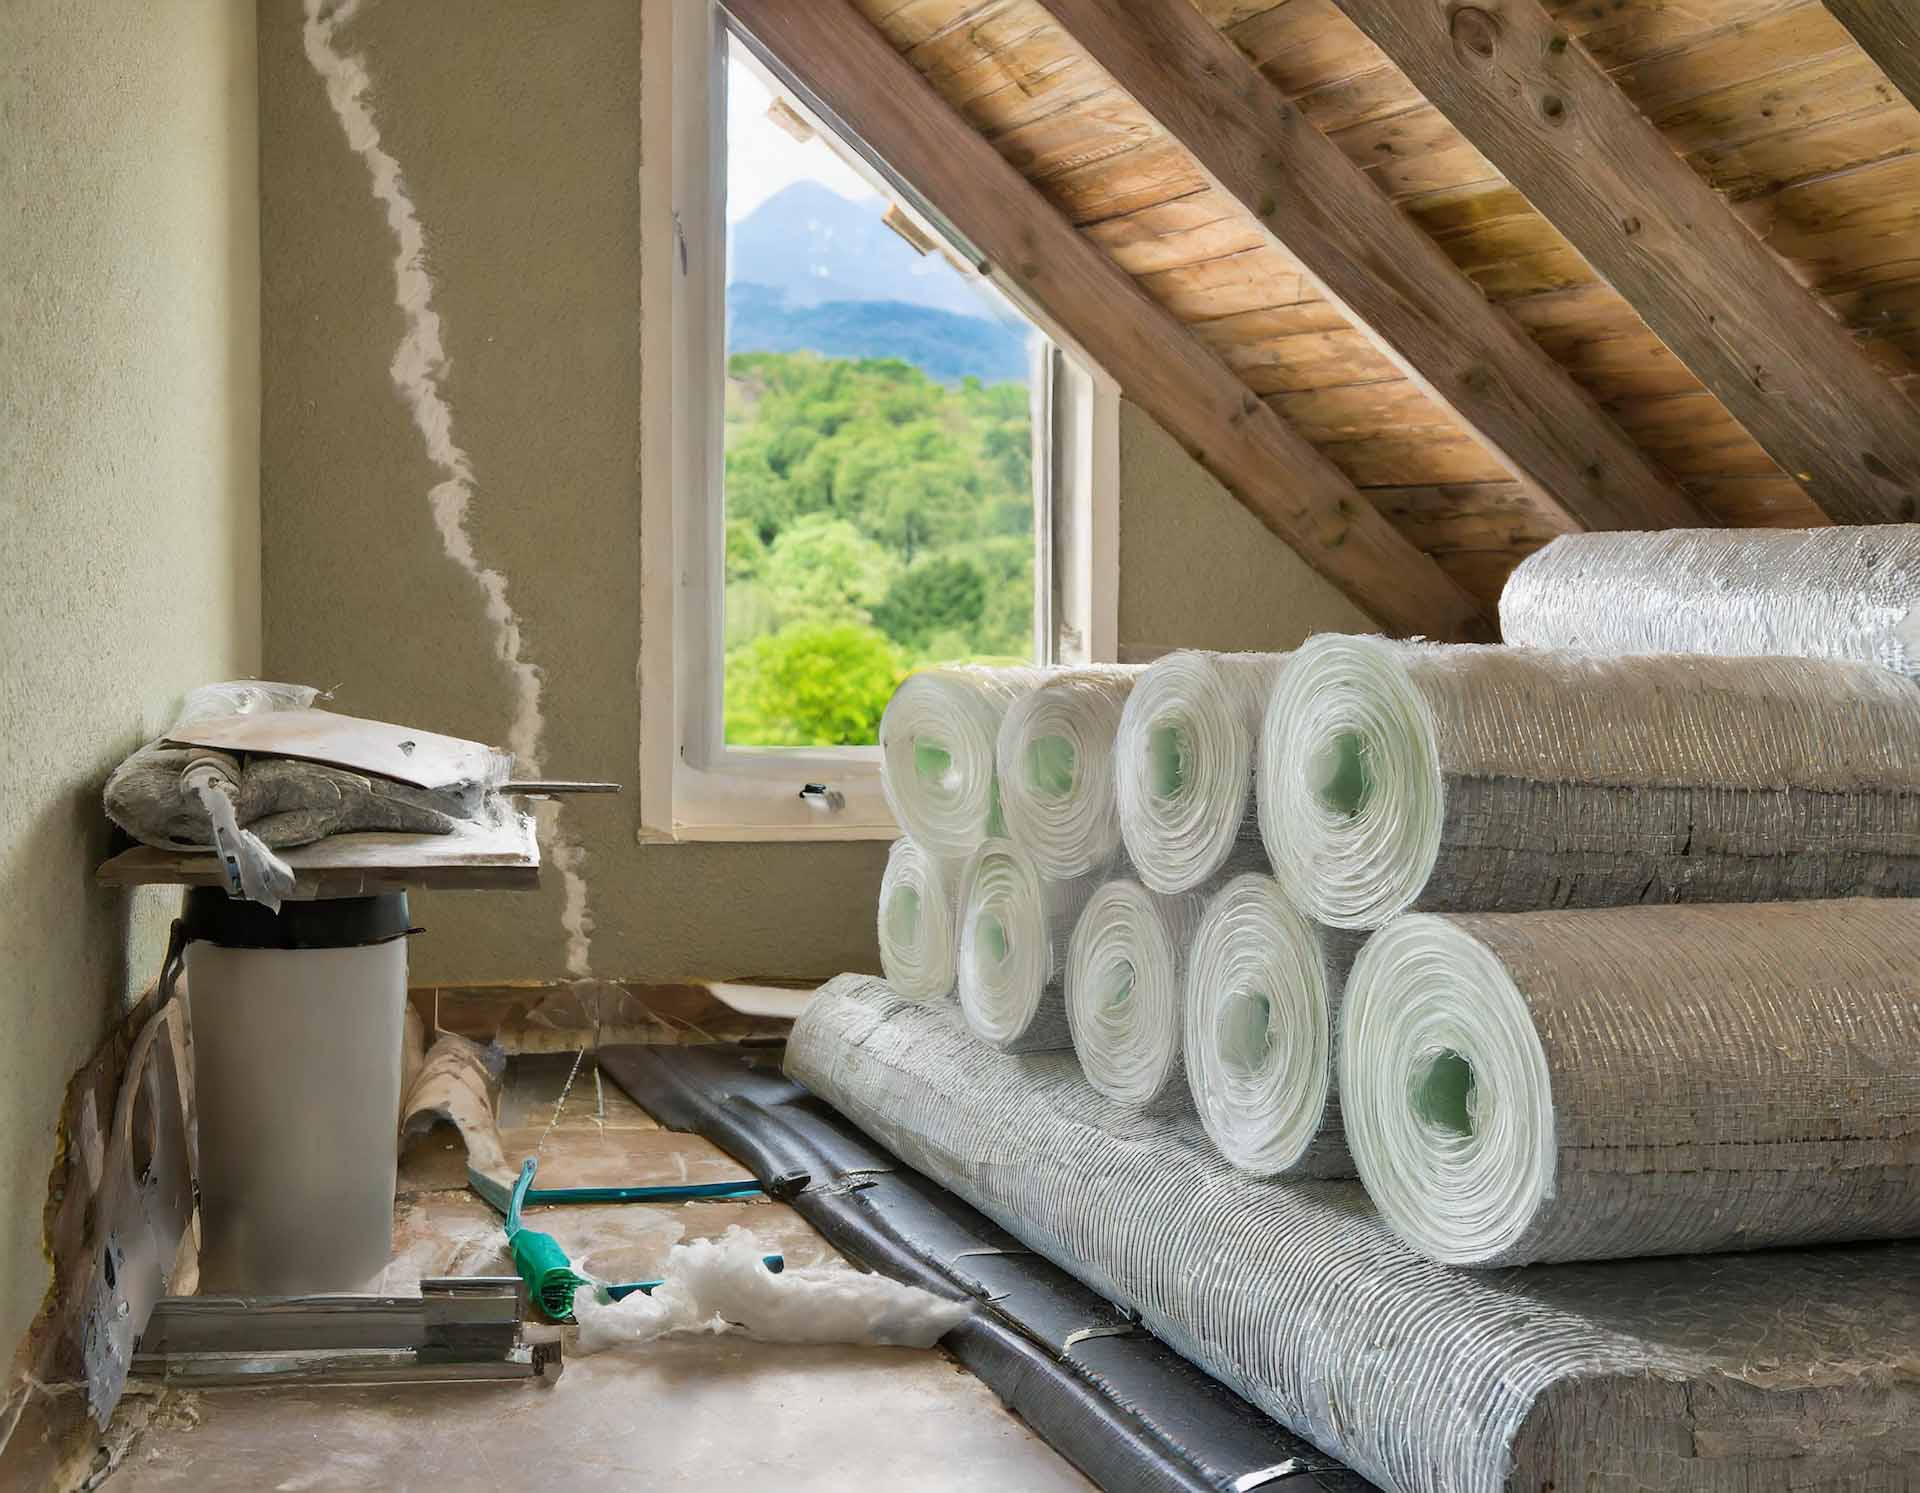 Asbestos Products That May Surprise You